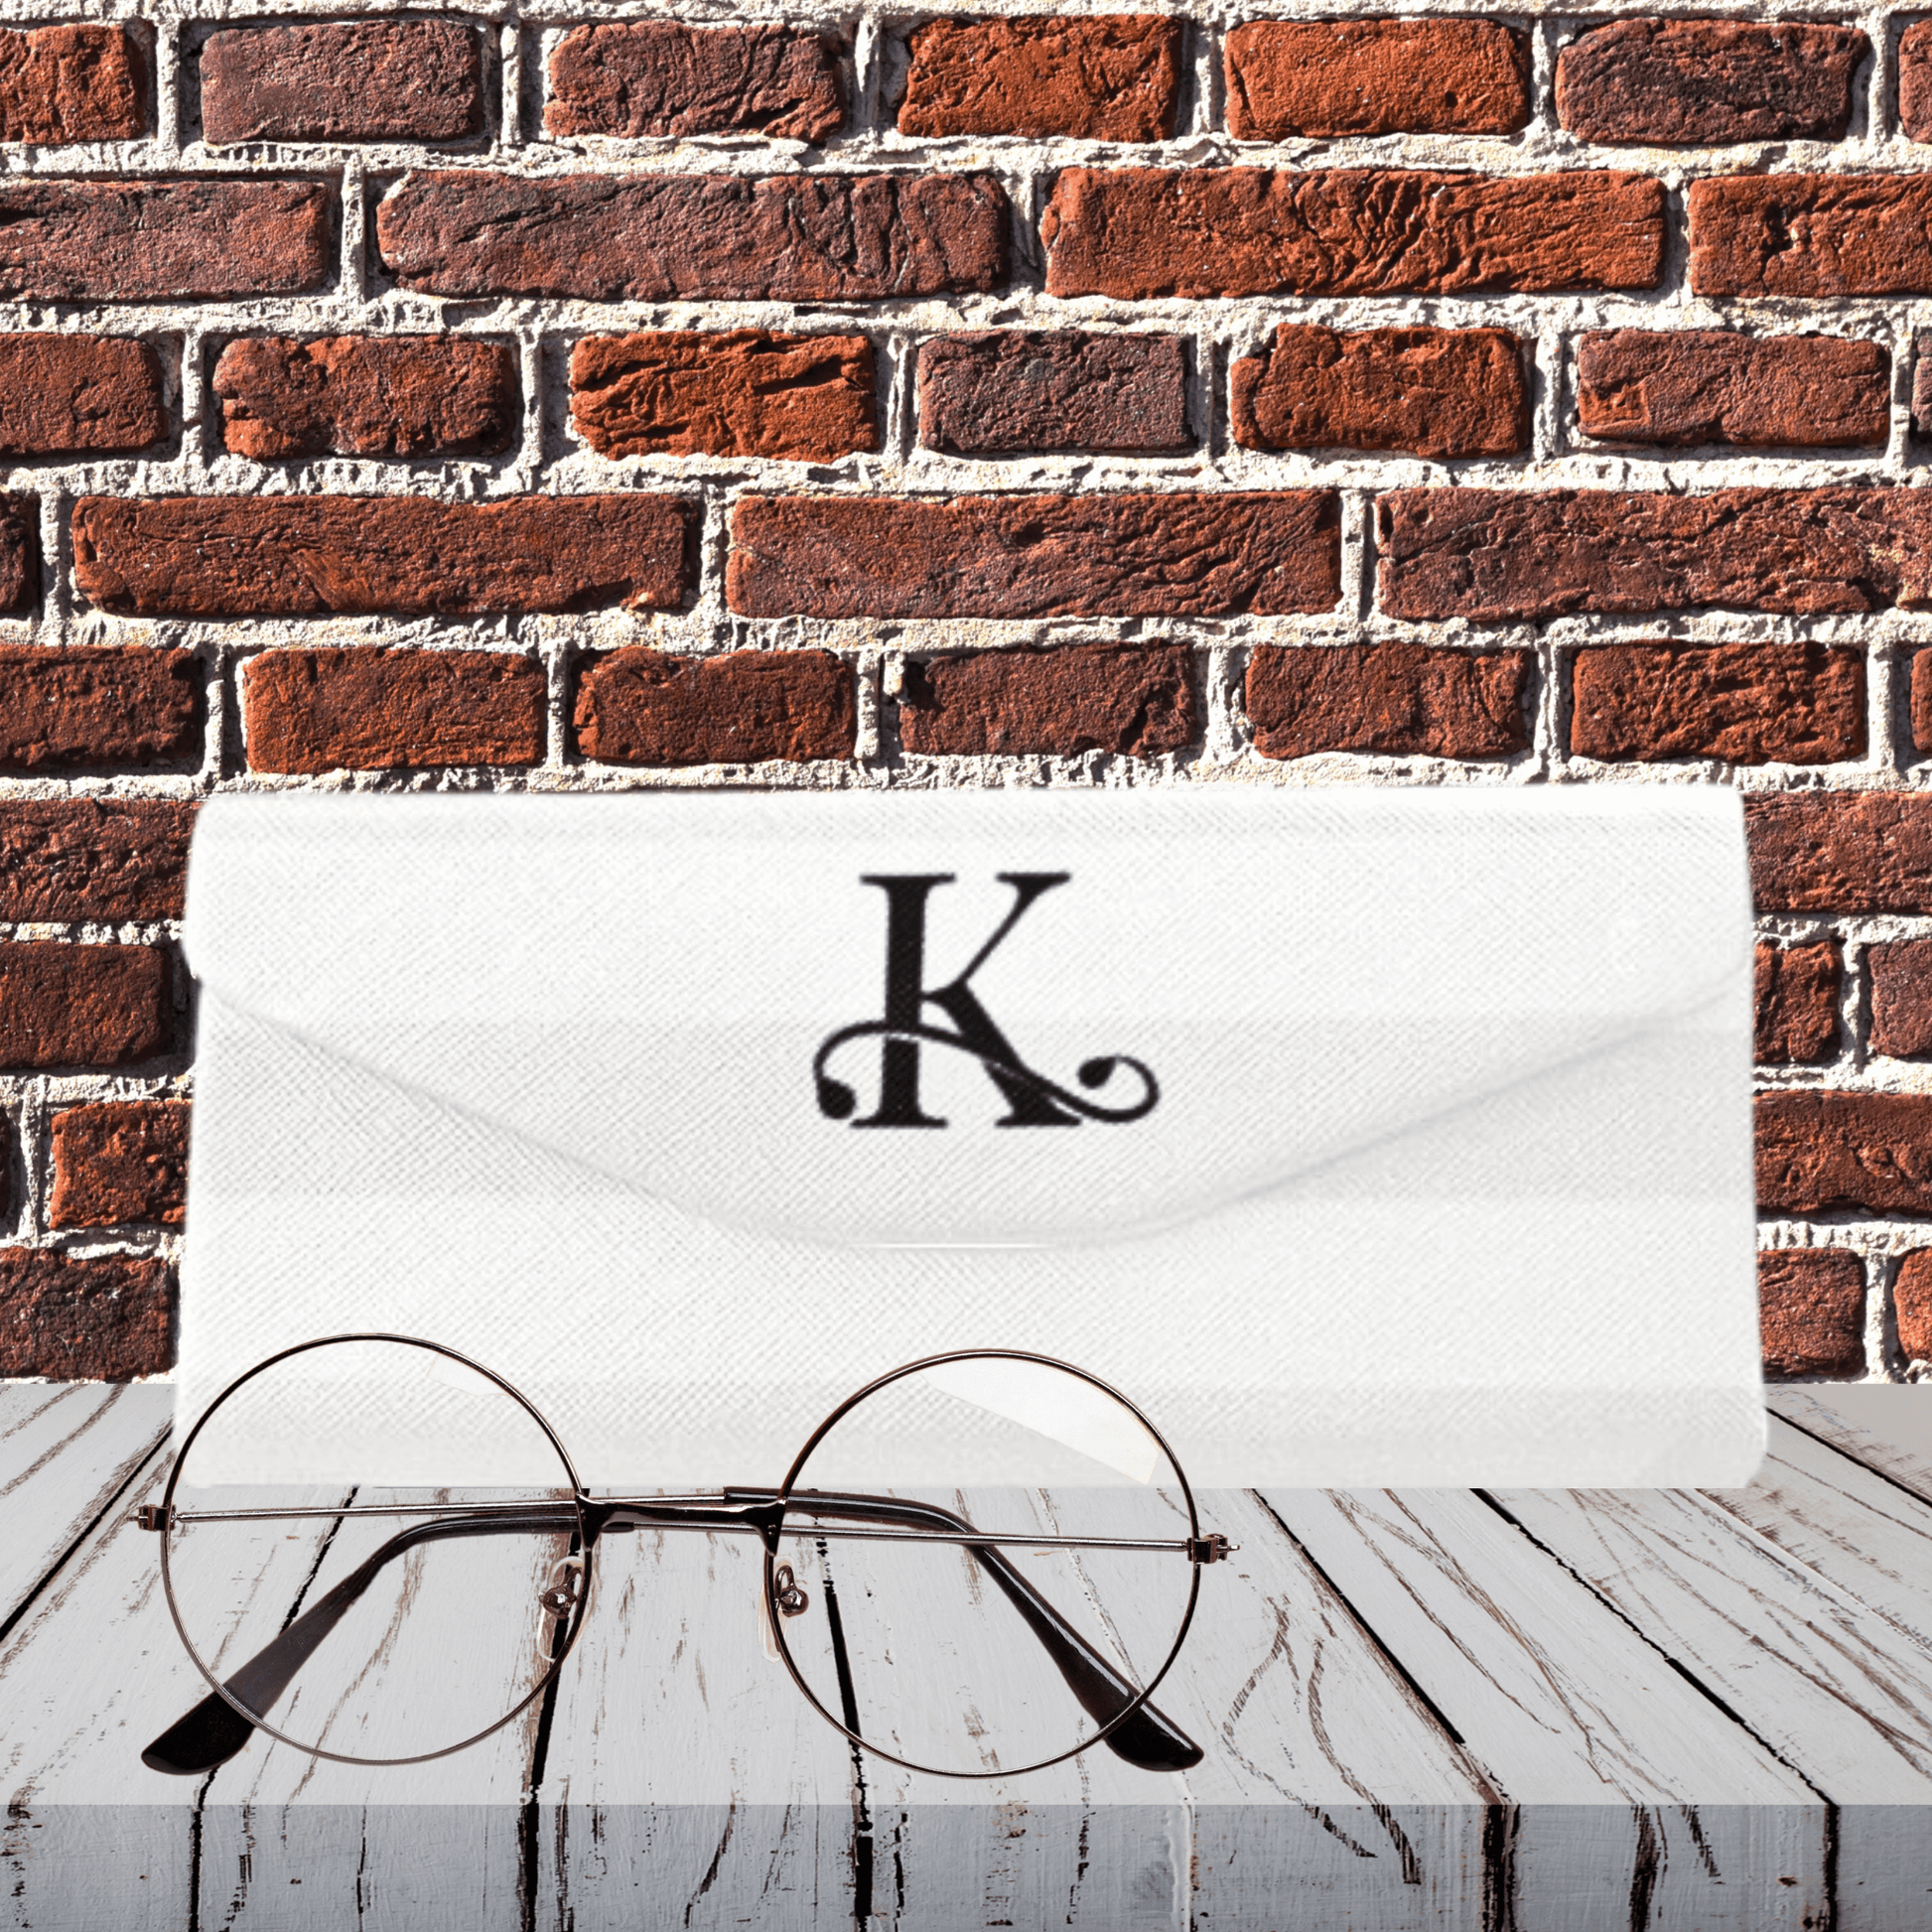 Our custom, foldable eyeglass cases are designed to collapse into a compact size when not in use. shown in front of brick wall to see striped details.